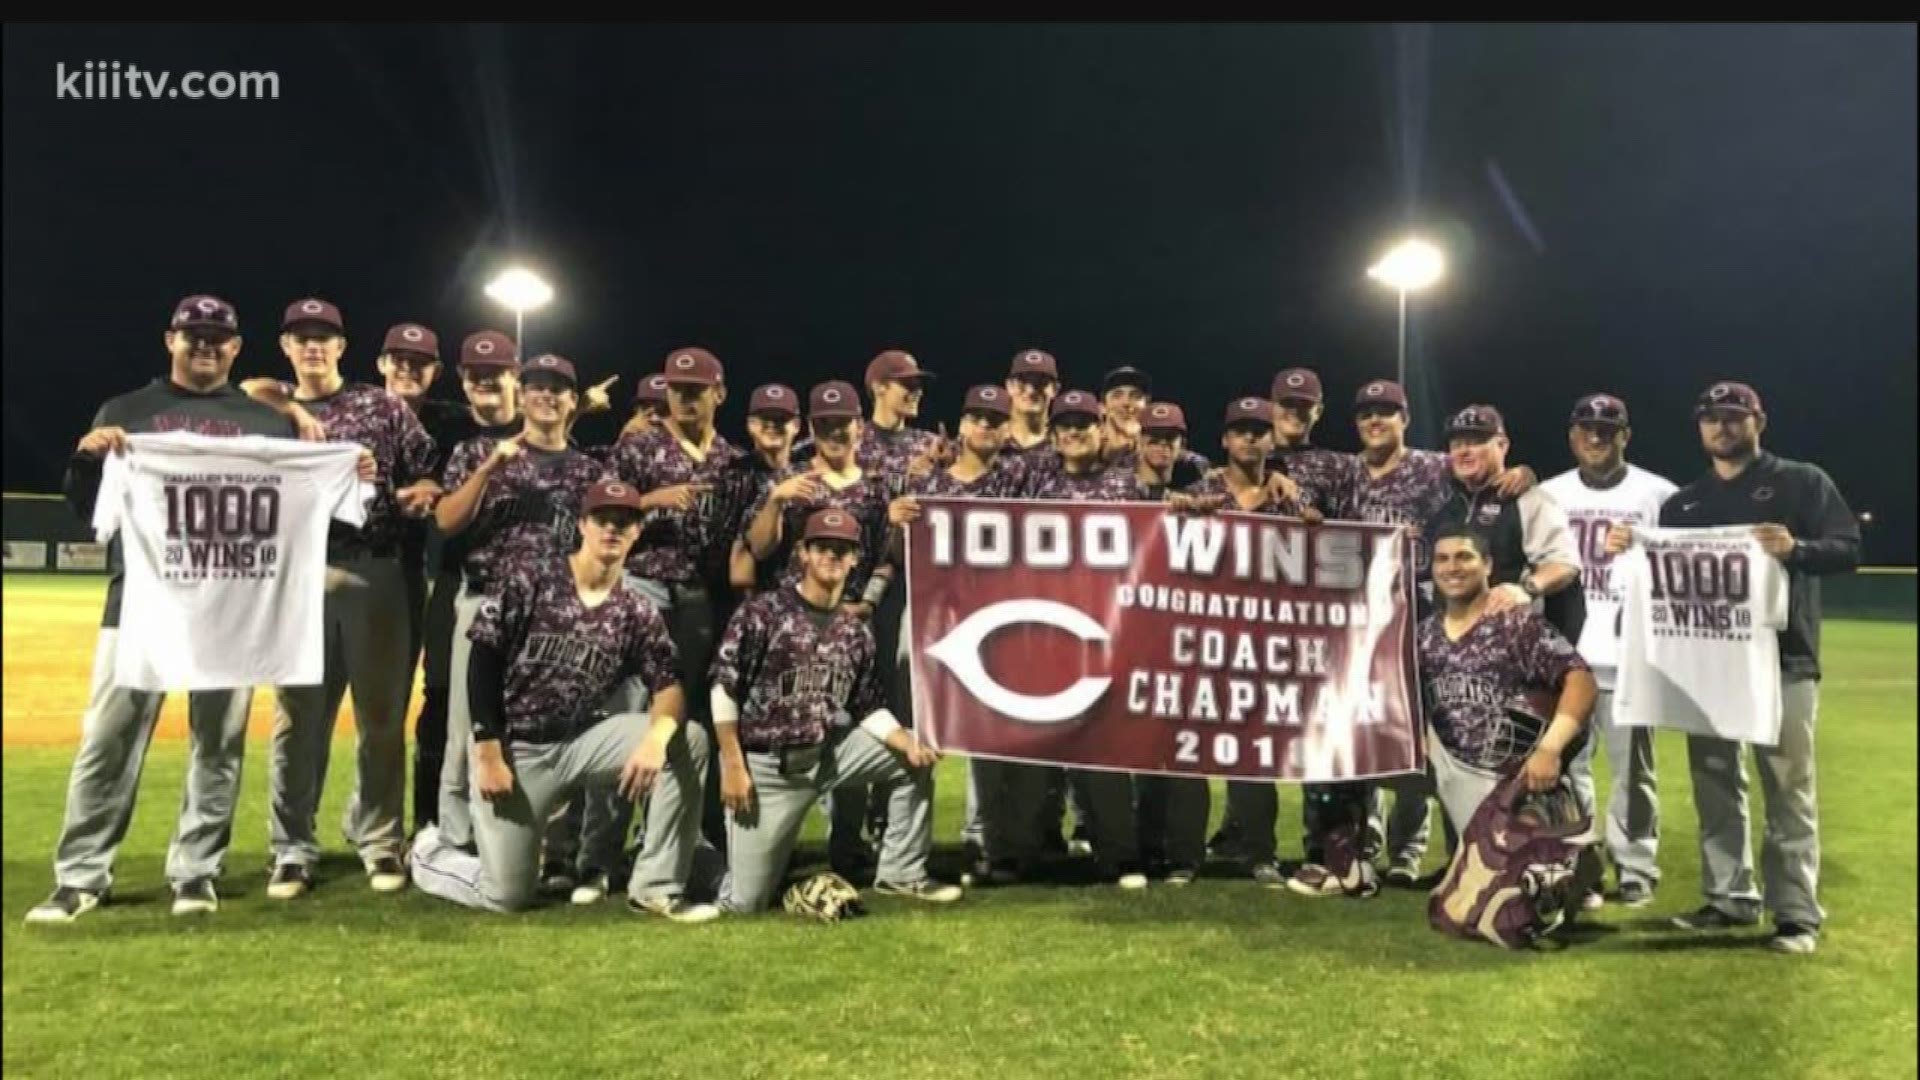 Calallen baseball head coach Steve Chapman reached the milestone of 1,000 wins with a 7-0 win over Tuloso-Midway.